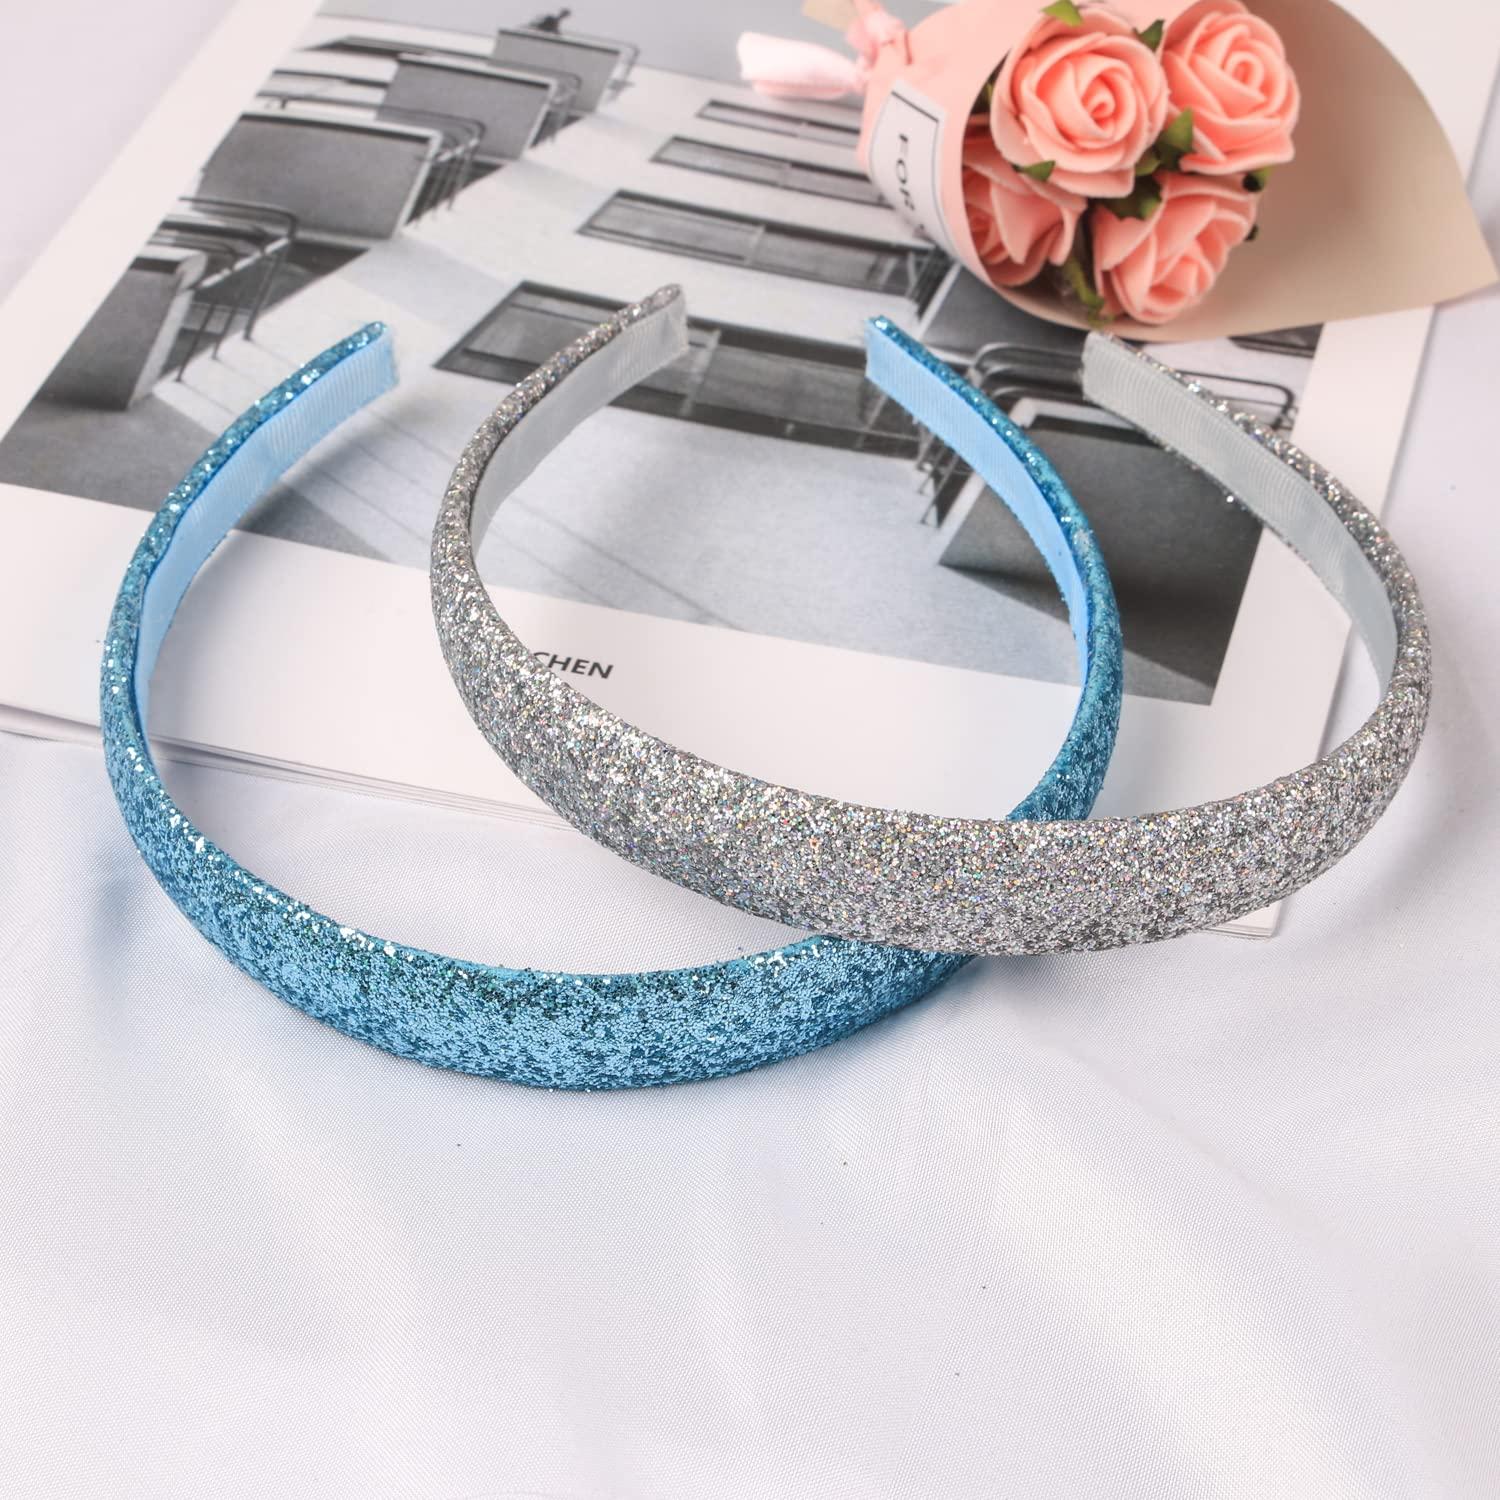 WANYU LIFE 12 Colors Sparkle Plastic Headbands For Girls,Glitter 2 cm Thin  Head Bands No